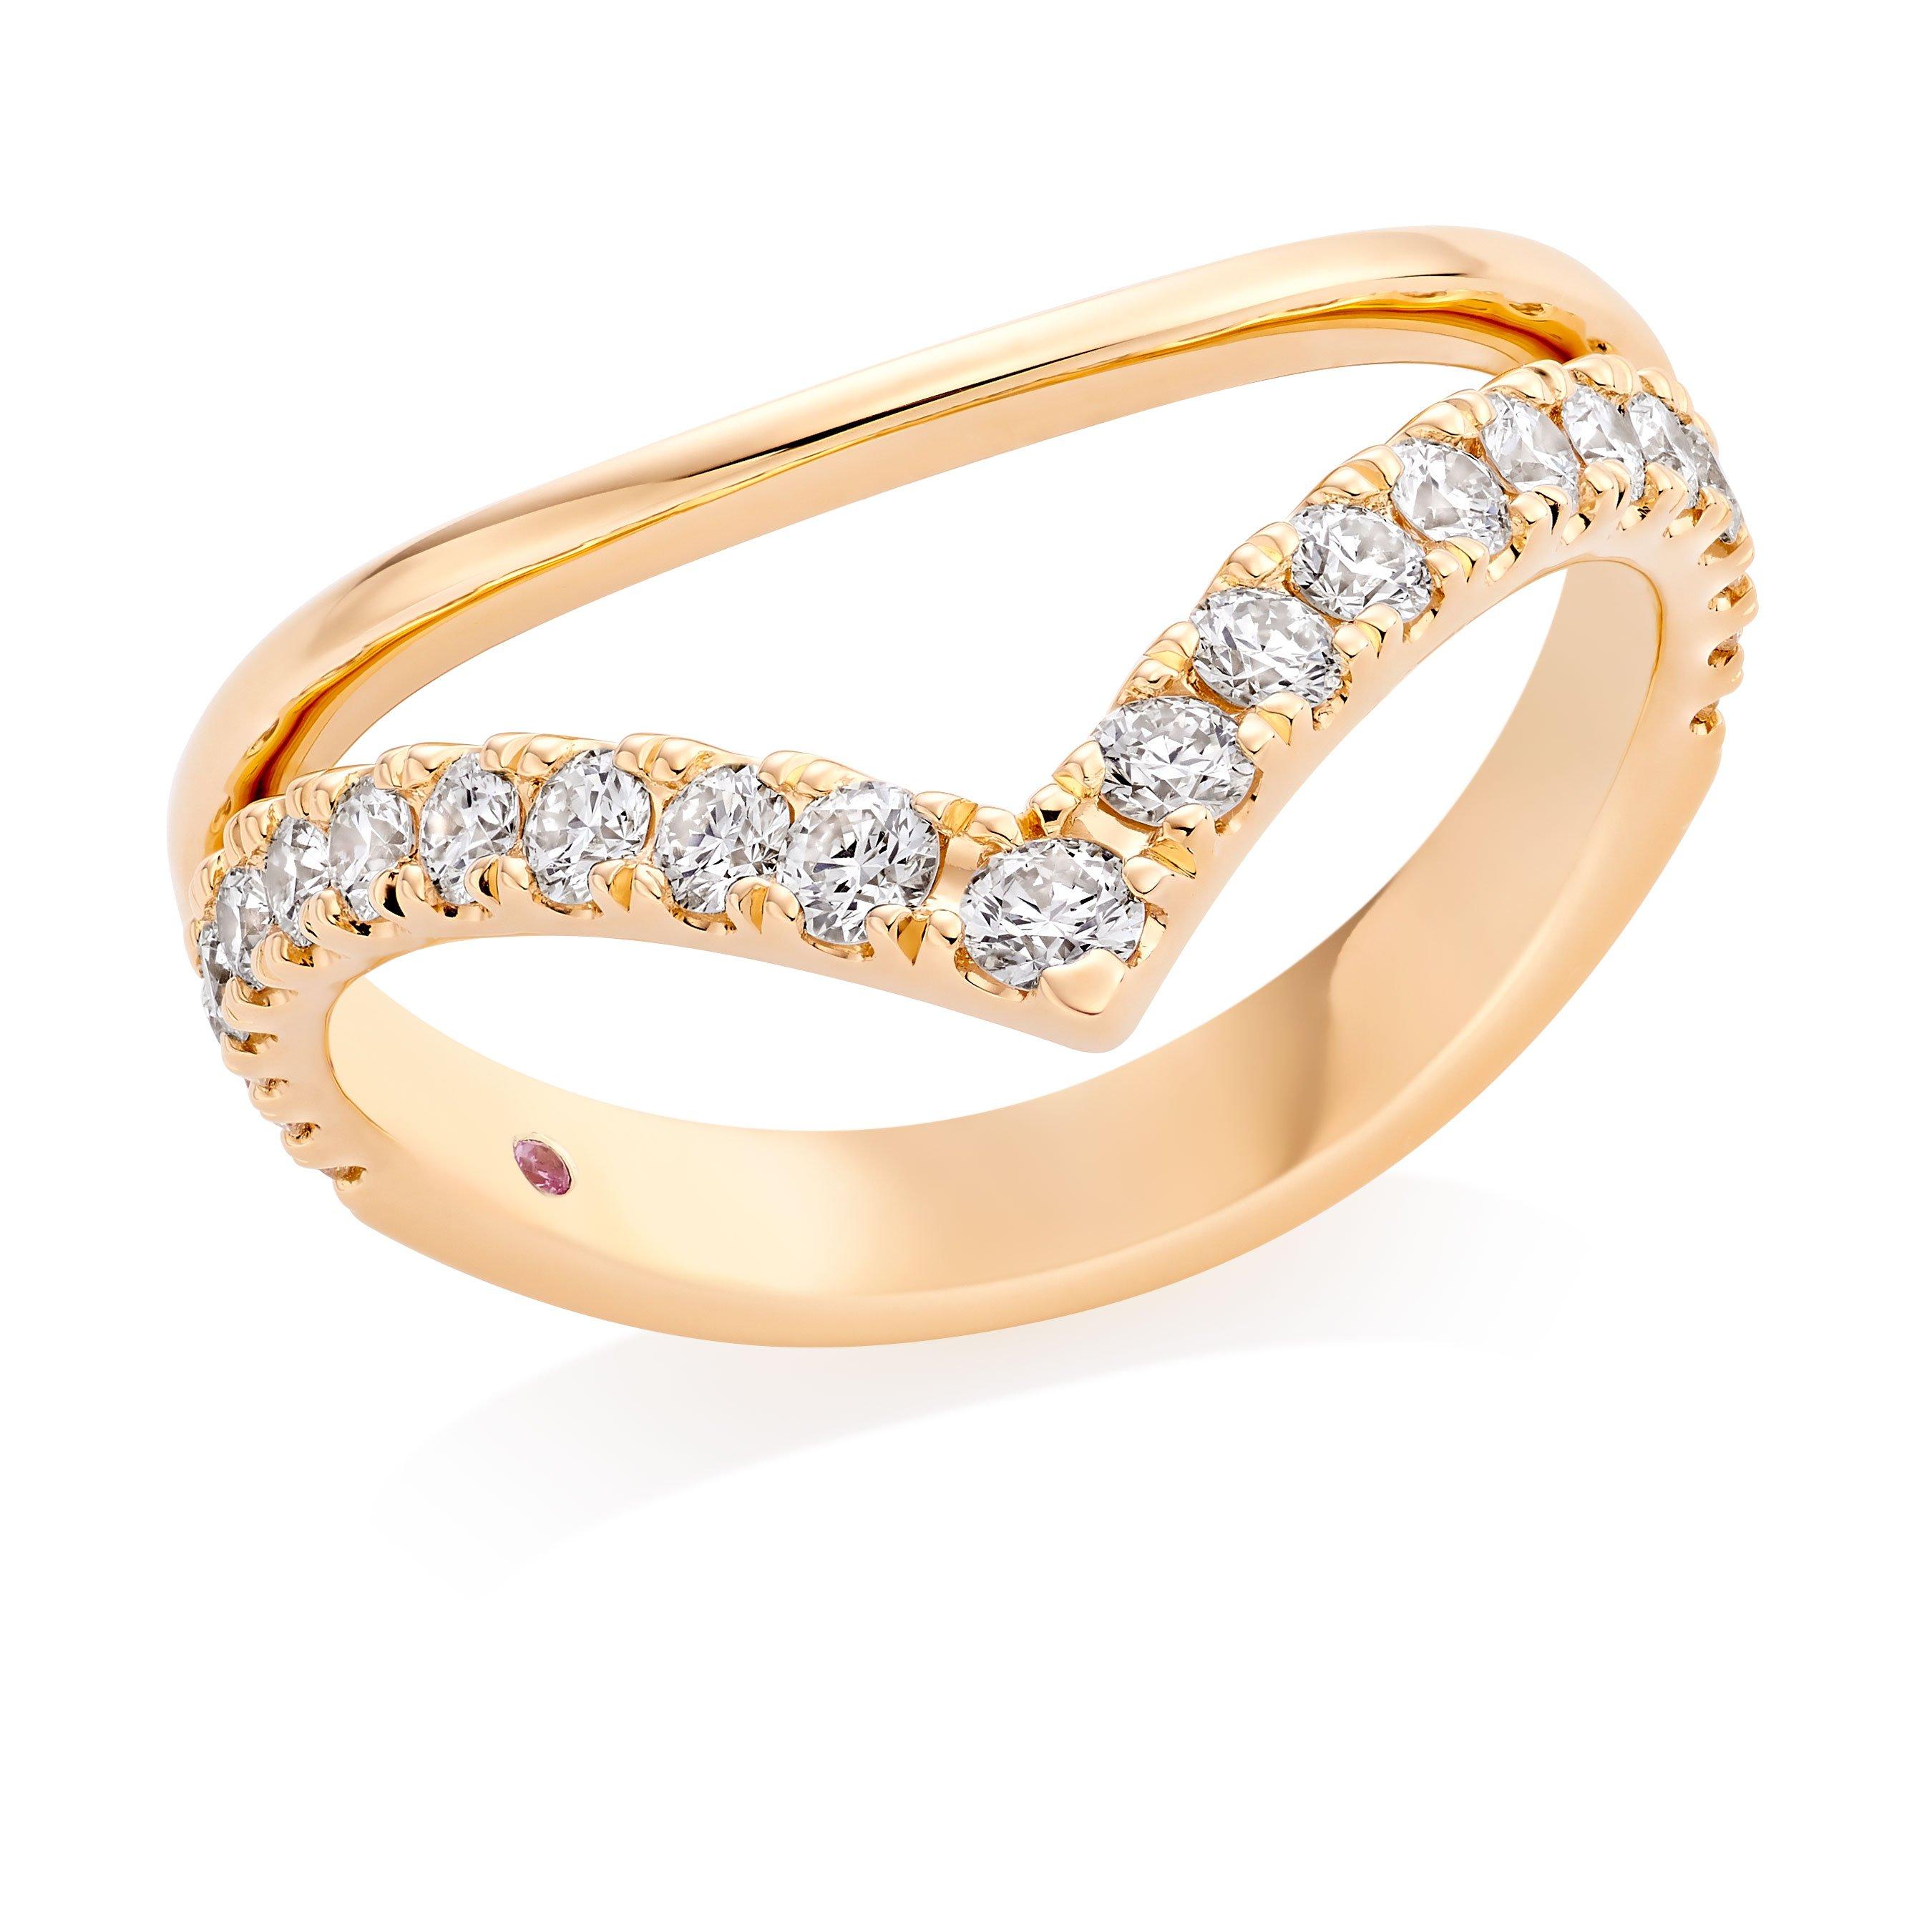 Hearts On Fire Hayley Paige Harley 18ct Gold Diamond Shaped Ring ...